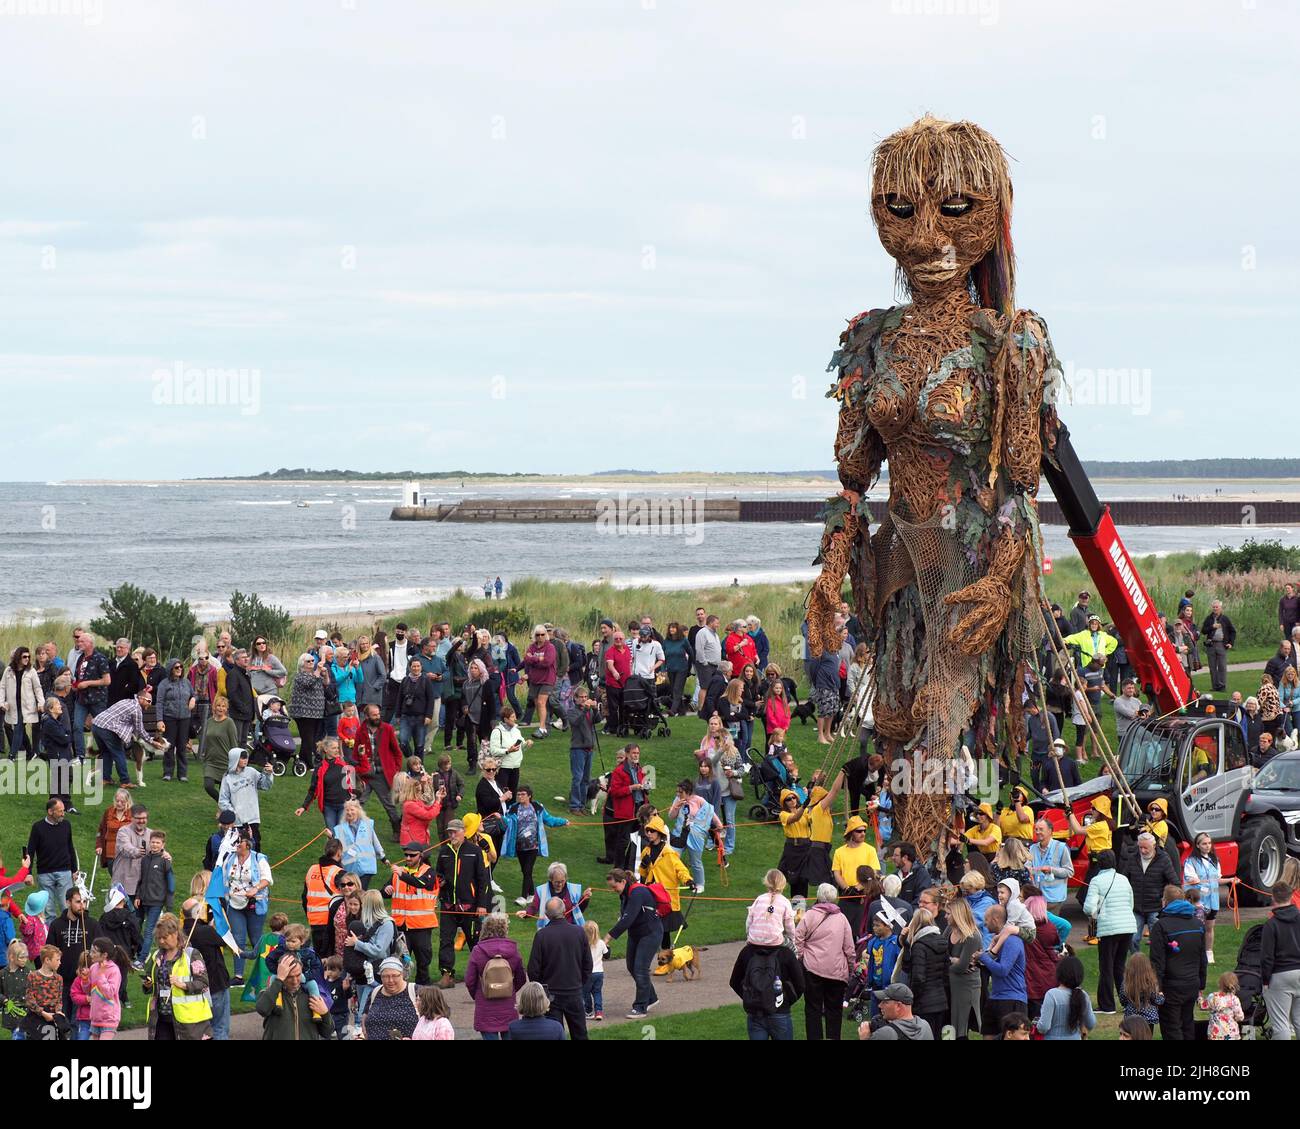 Storm, the mythical sea goddess walking amongst people at Nairn Links on an overcast day. She is a 10 metre tall puppet. Stock Photo